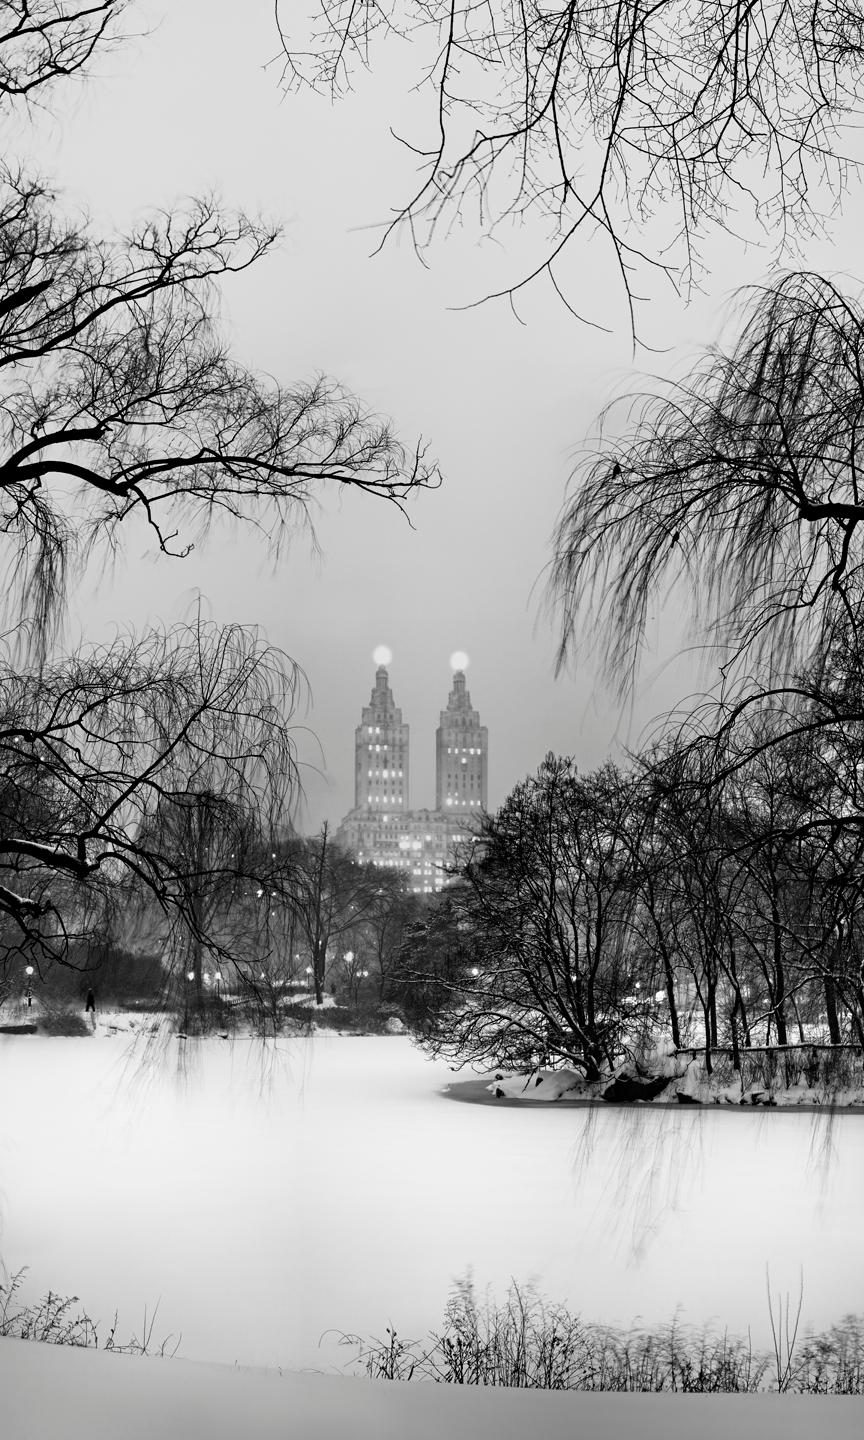 Jeff Chien-Hsing Liao
Winter Sostice, 2015
Archival Pigment Print
40 x 24 inches
Edition of 9

This photograph is from Liao's series, Central Park New York - 24 Solar Terms.  The title of the series takes its name from the ancient Chinese lunar